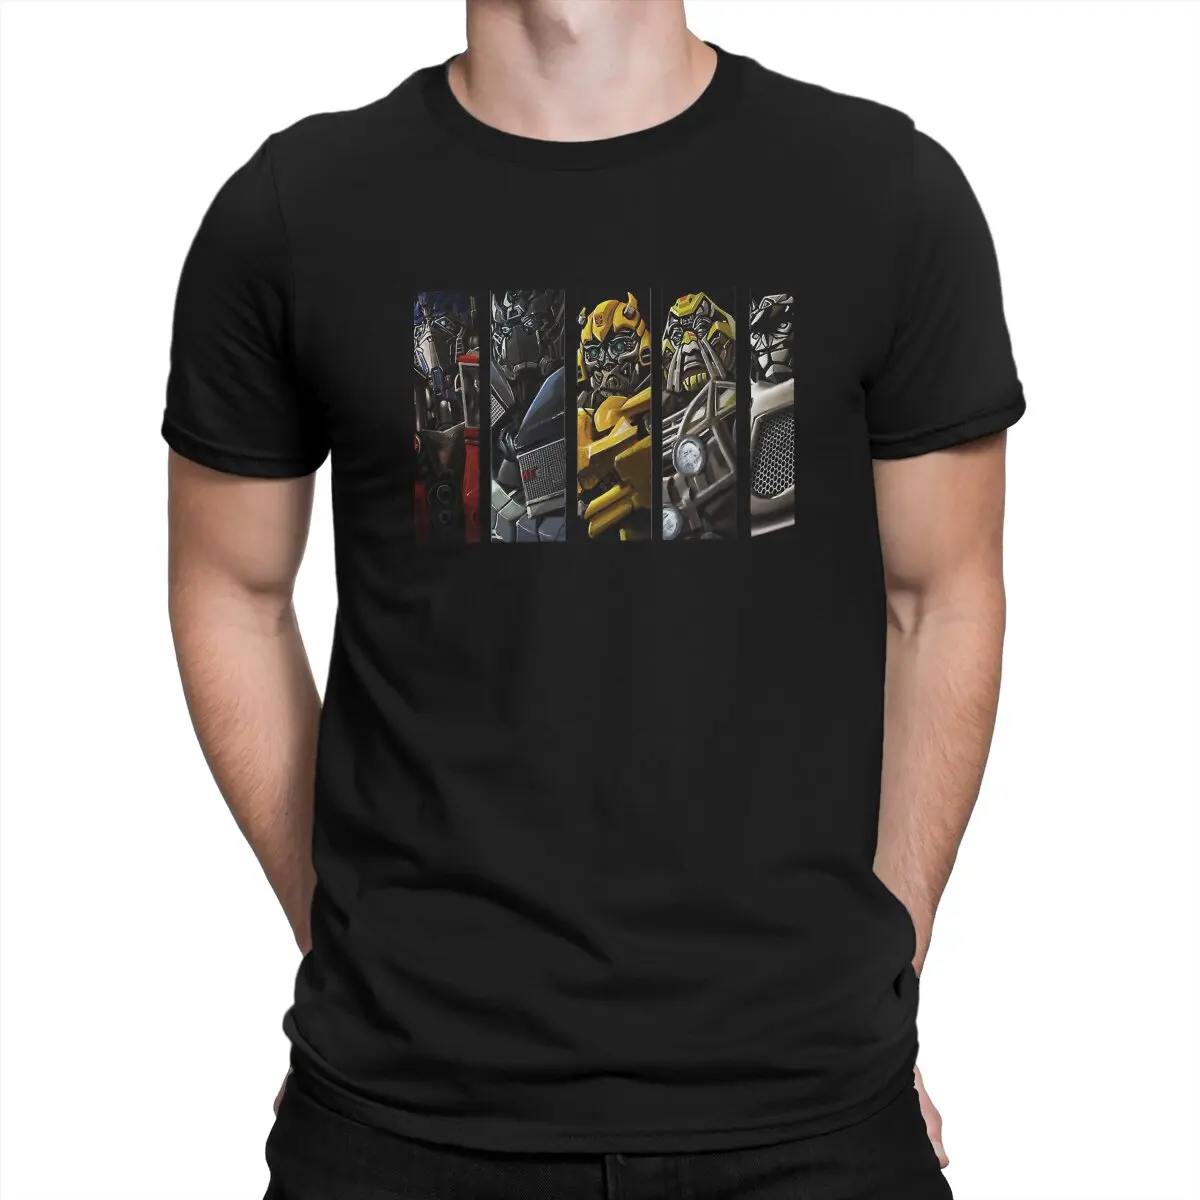 

Transformers Science Fiction Action Film Heros Tshirt Homme Men's Tees Blusas Polyester T Shirt For Men